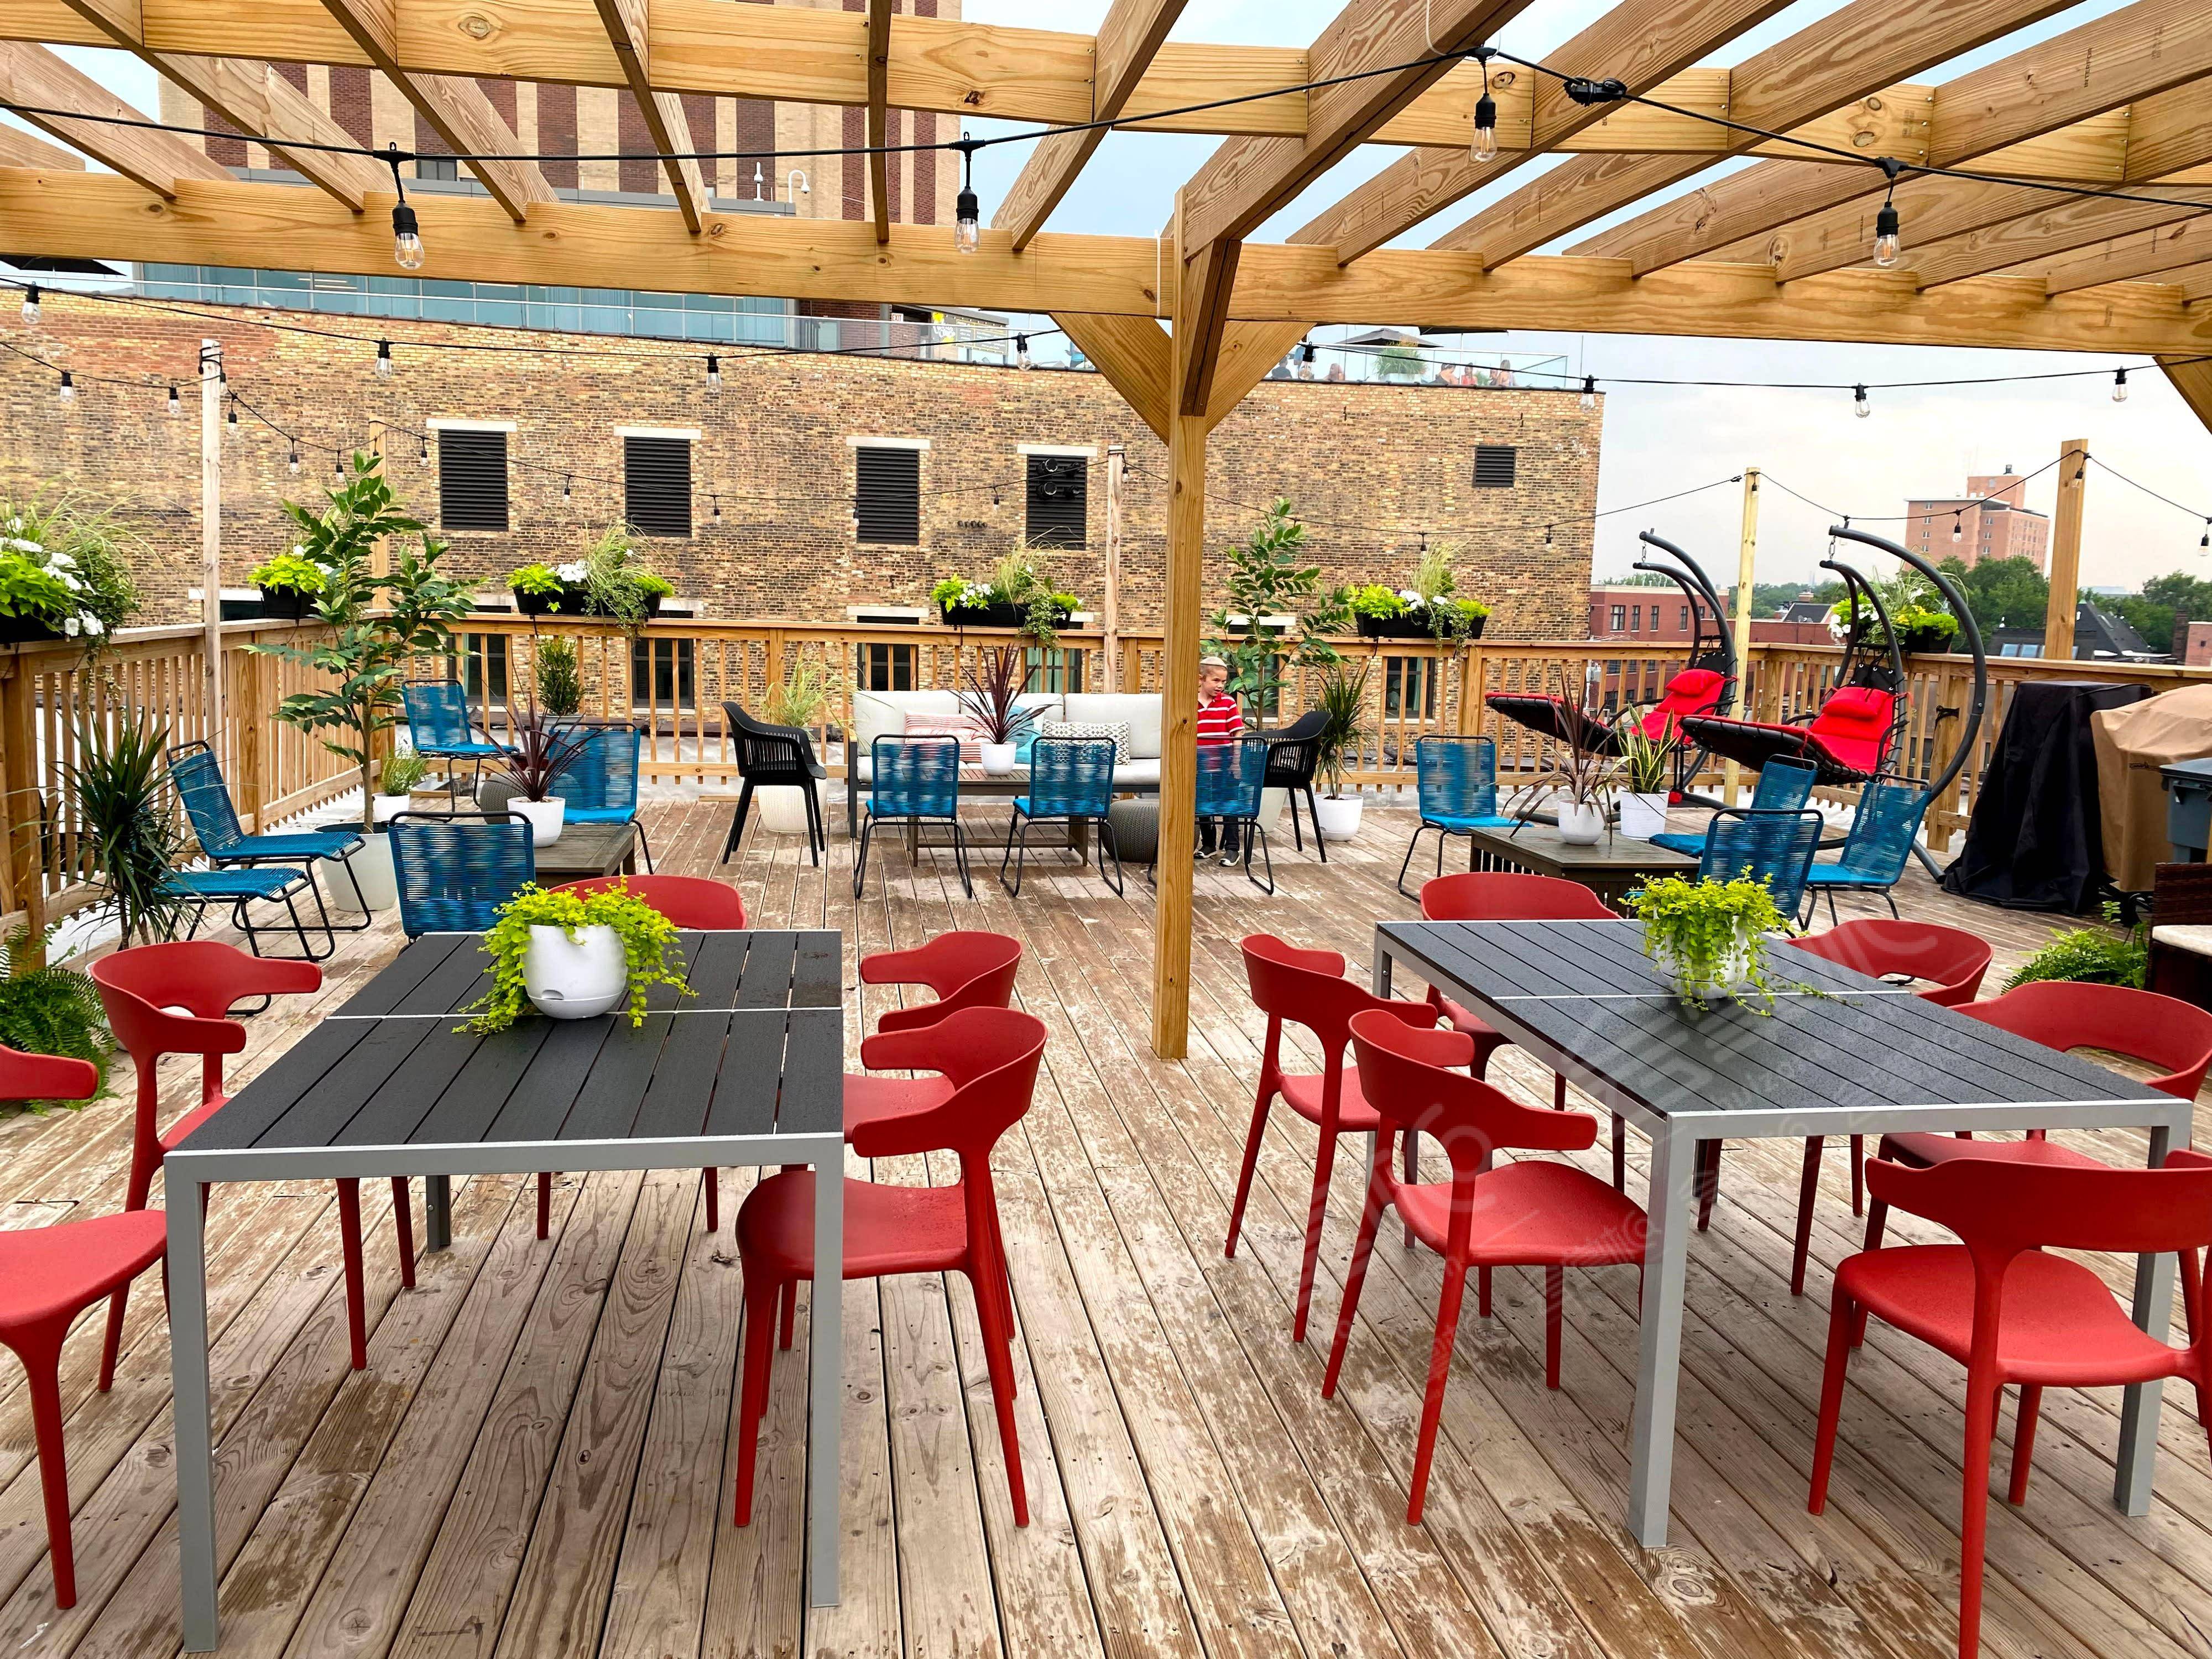 Panoramic Views from 1800 sqft Rooftop in the Heart of Wicker Park